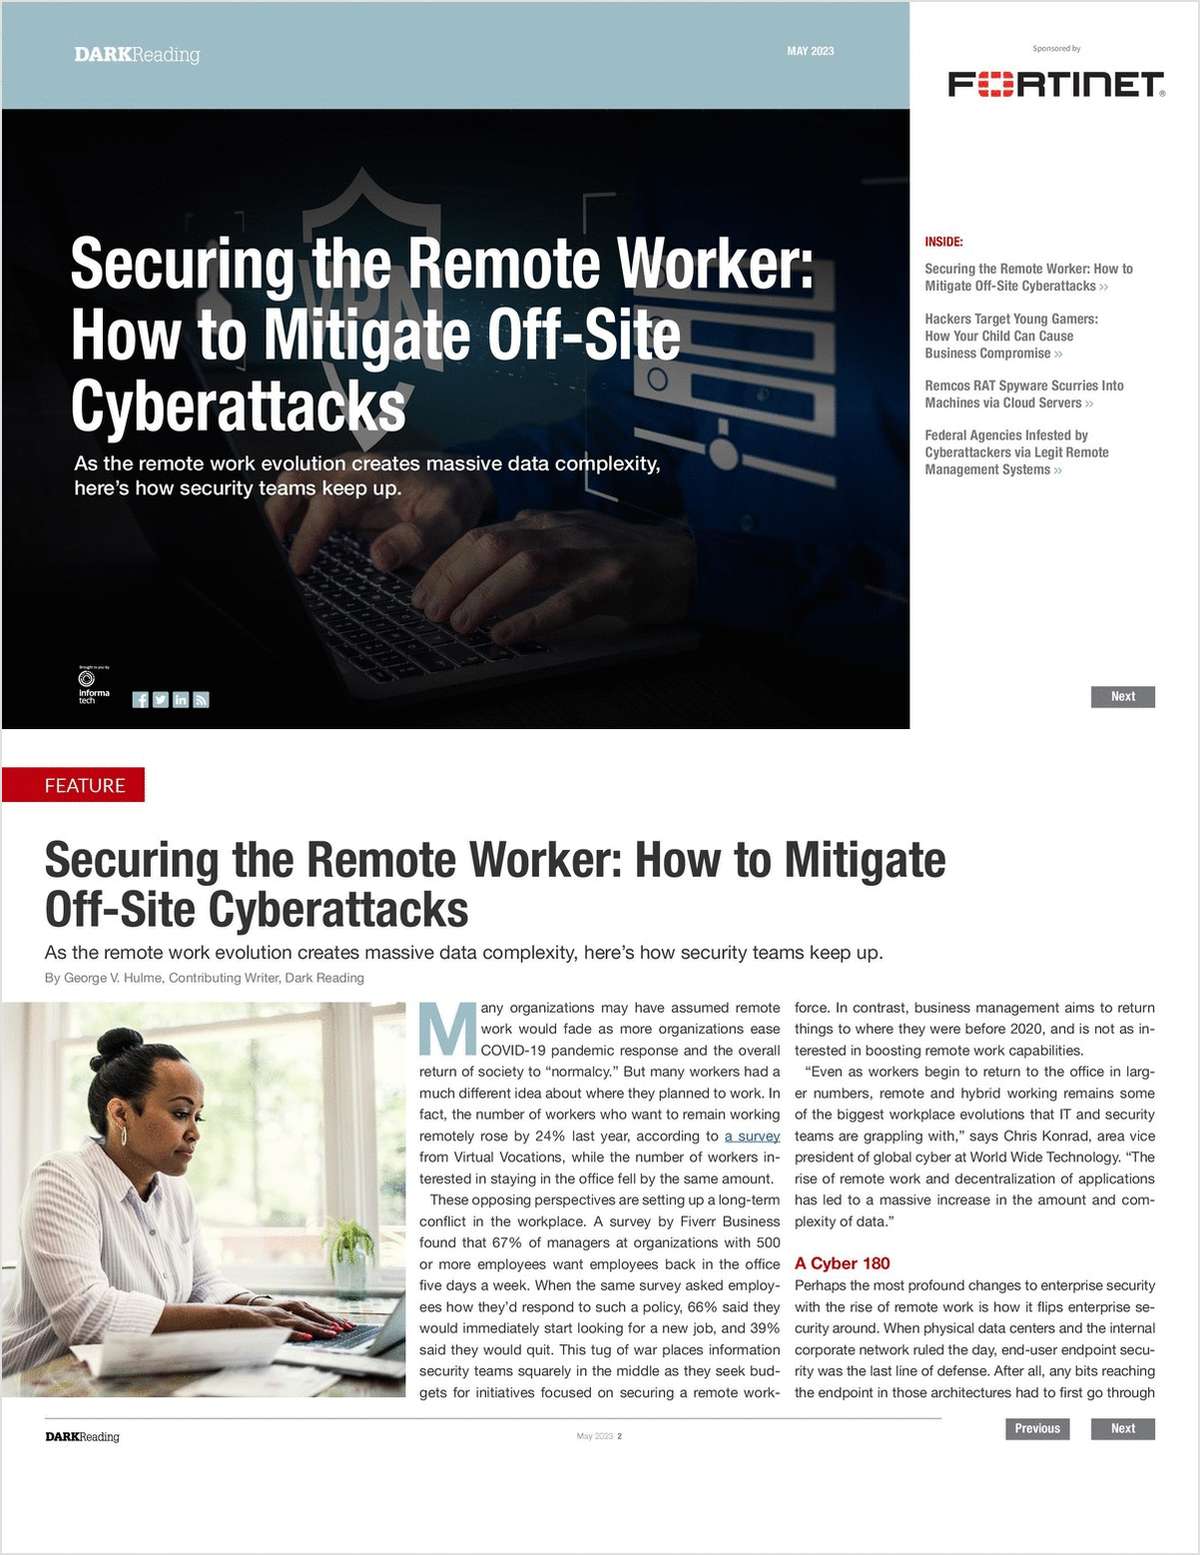 Securing the Remote Worker: How to Mitigate Off-Site Cyberattacks